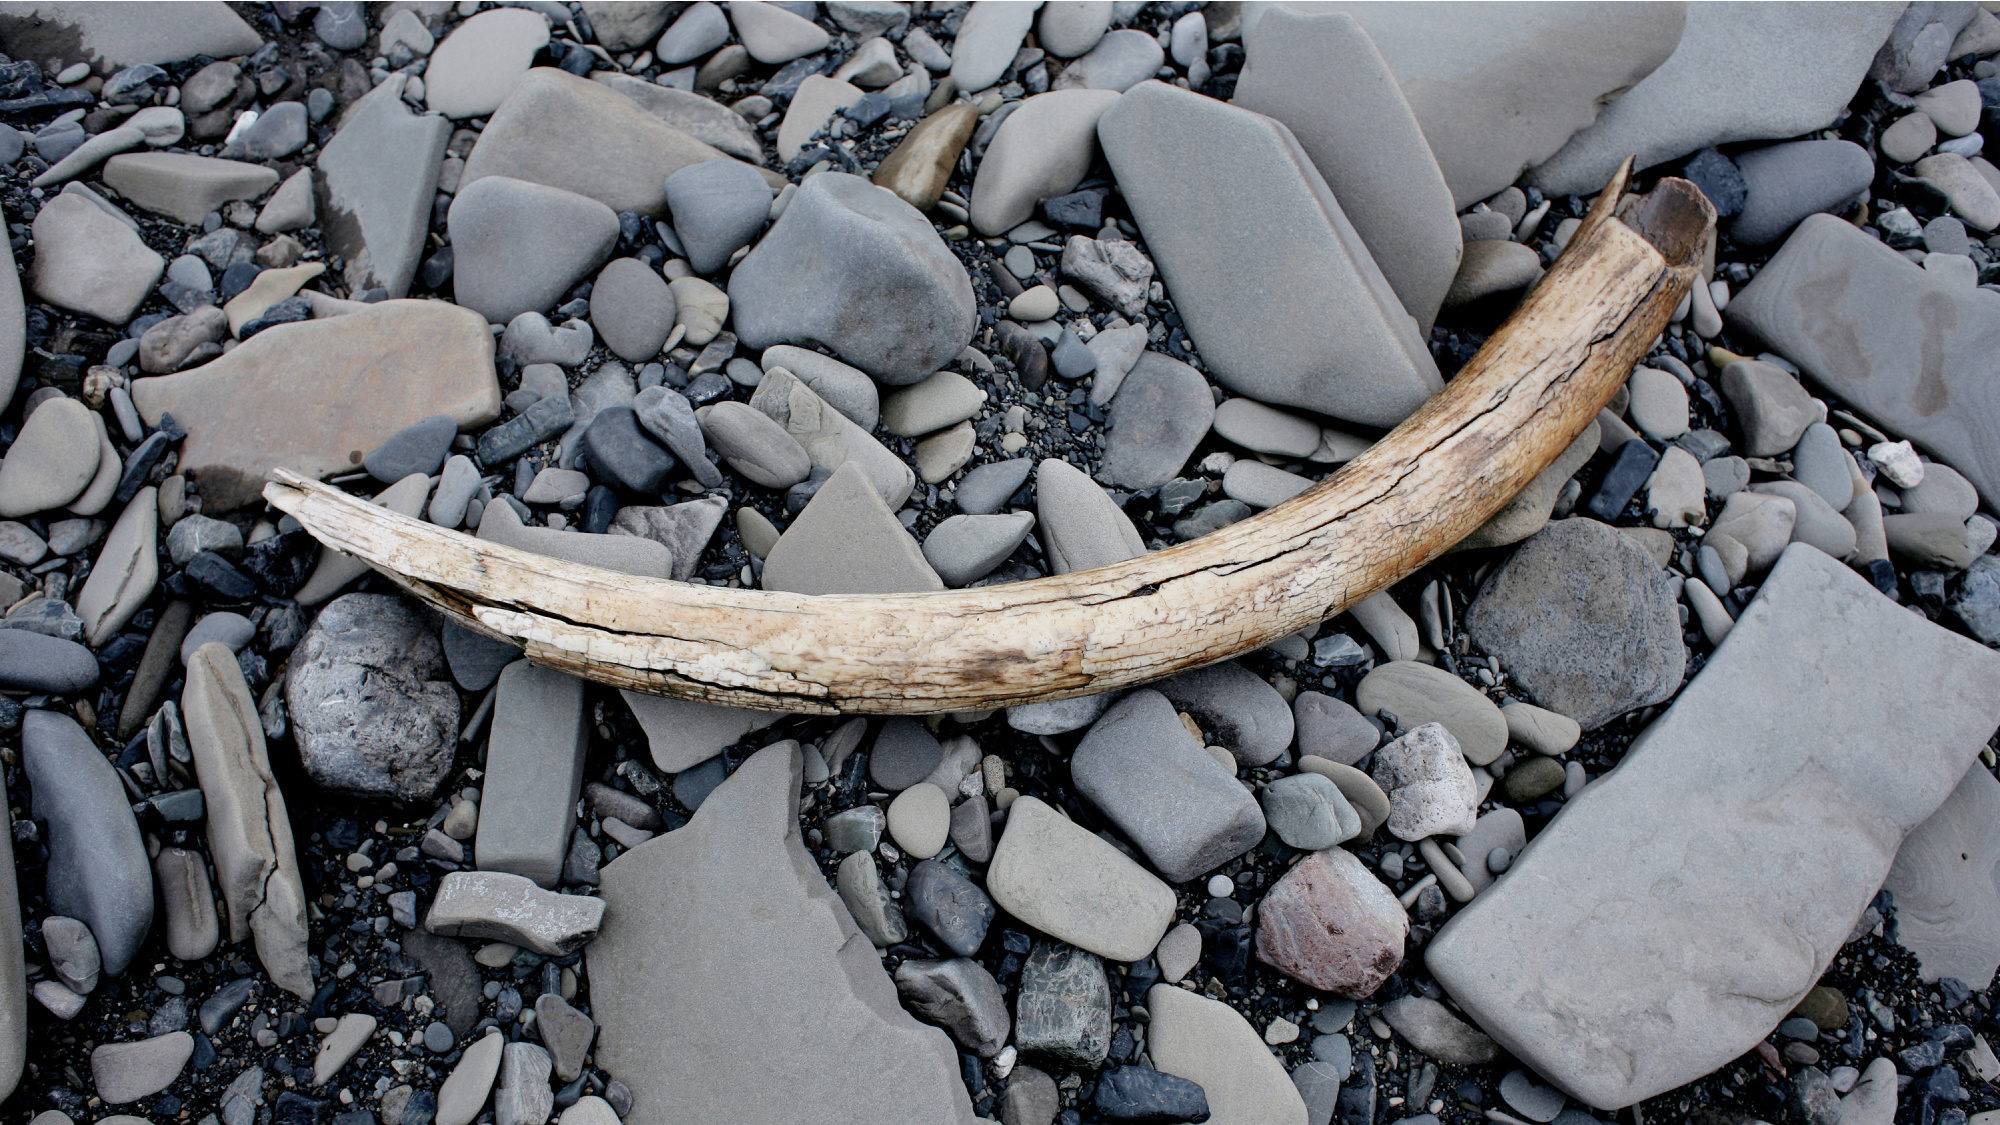 A remnant of a woolly mammoth tusk rests on the ground in Alaska.